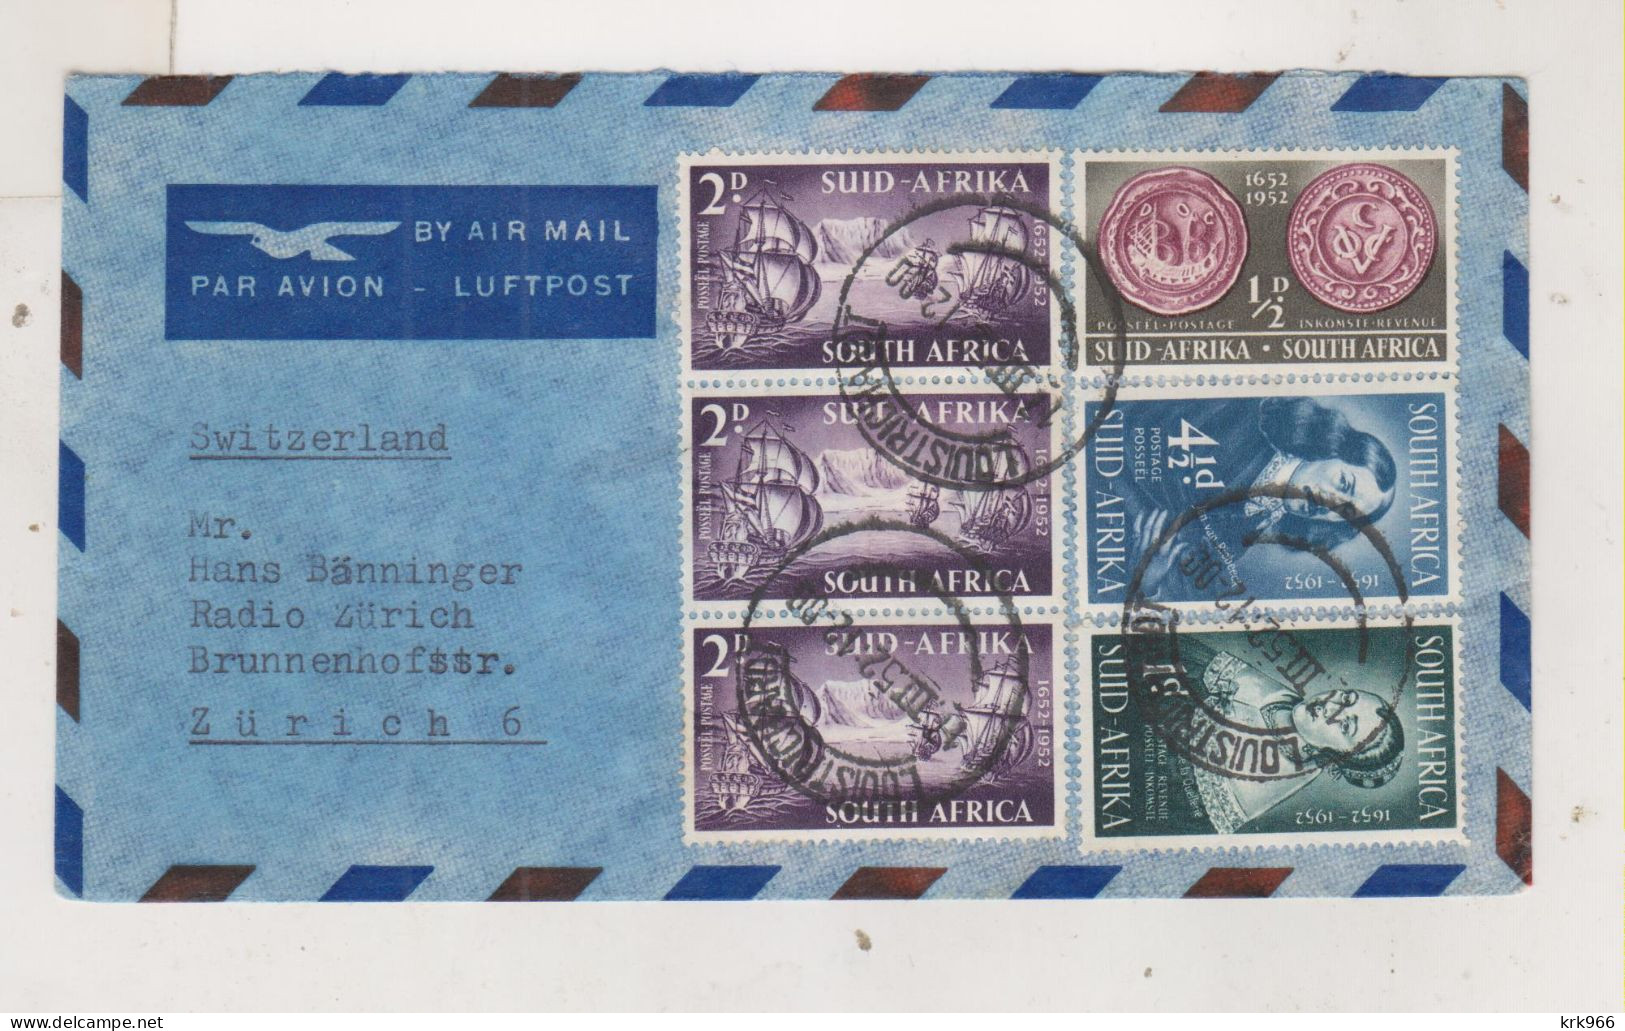 SOUTH AFRICA 1952 LOUIS TRIHARDT Nice Airmail Cover To Switzerland - Poste Aérienne